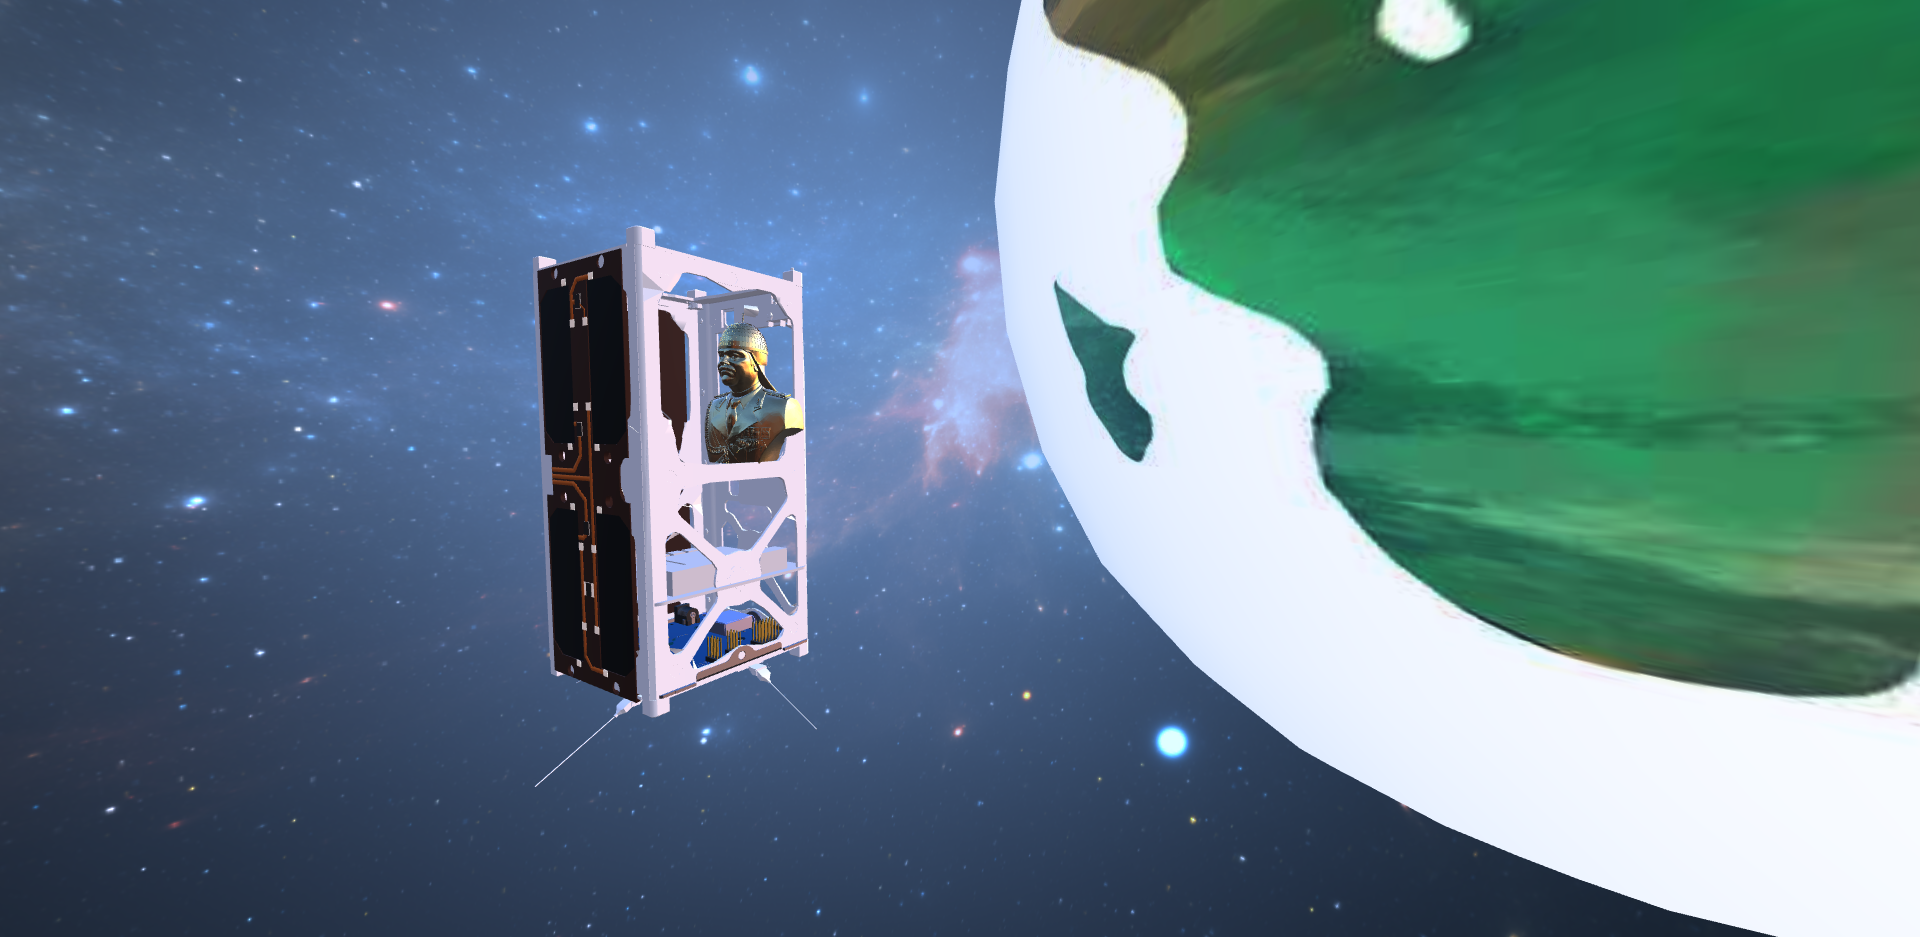 Installation view of Canto III (cubesat) in New Art City.  The cubesat is floating in space above Earth.  The cubesat has a gold bust of Saddam Hussein inside of it.